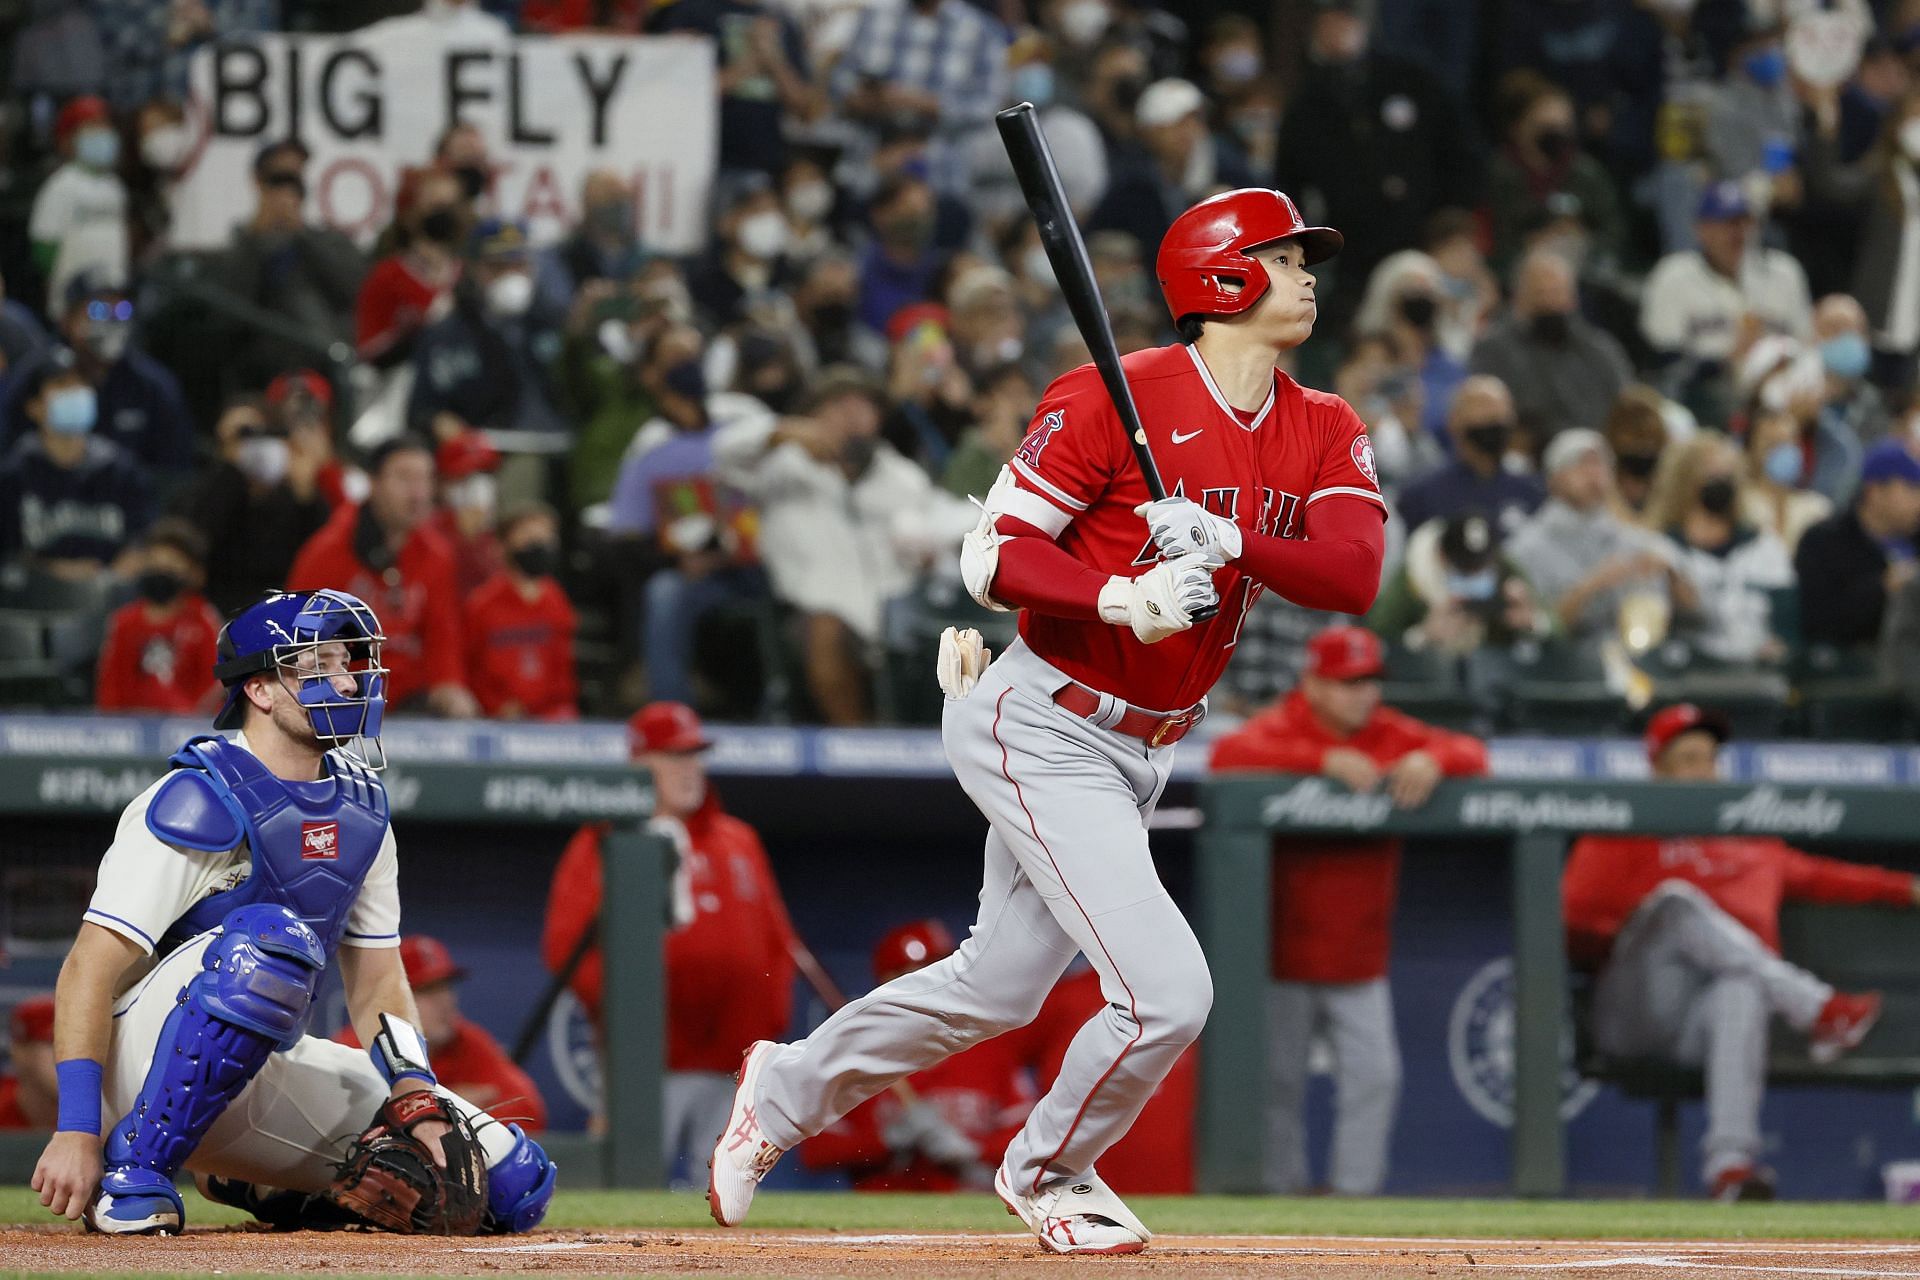 Shohei Ohtani batting in a Los Angeles Angels v Seattle Mariners game